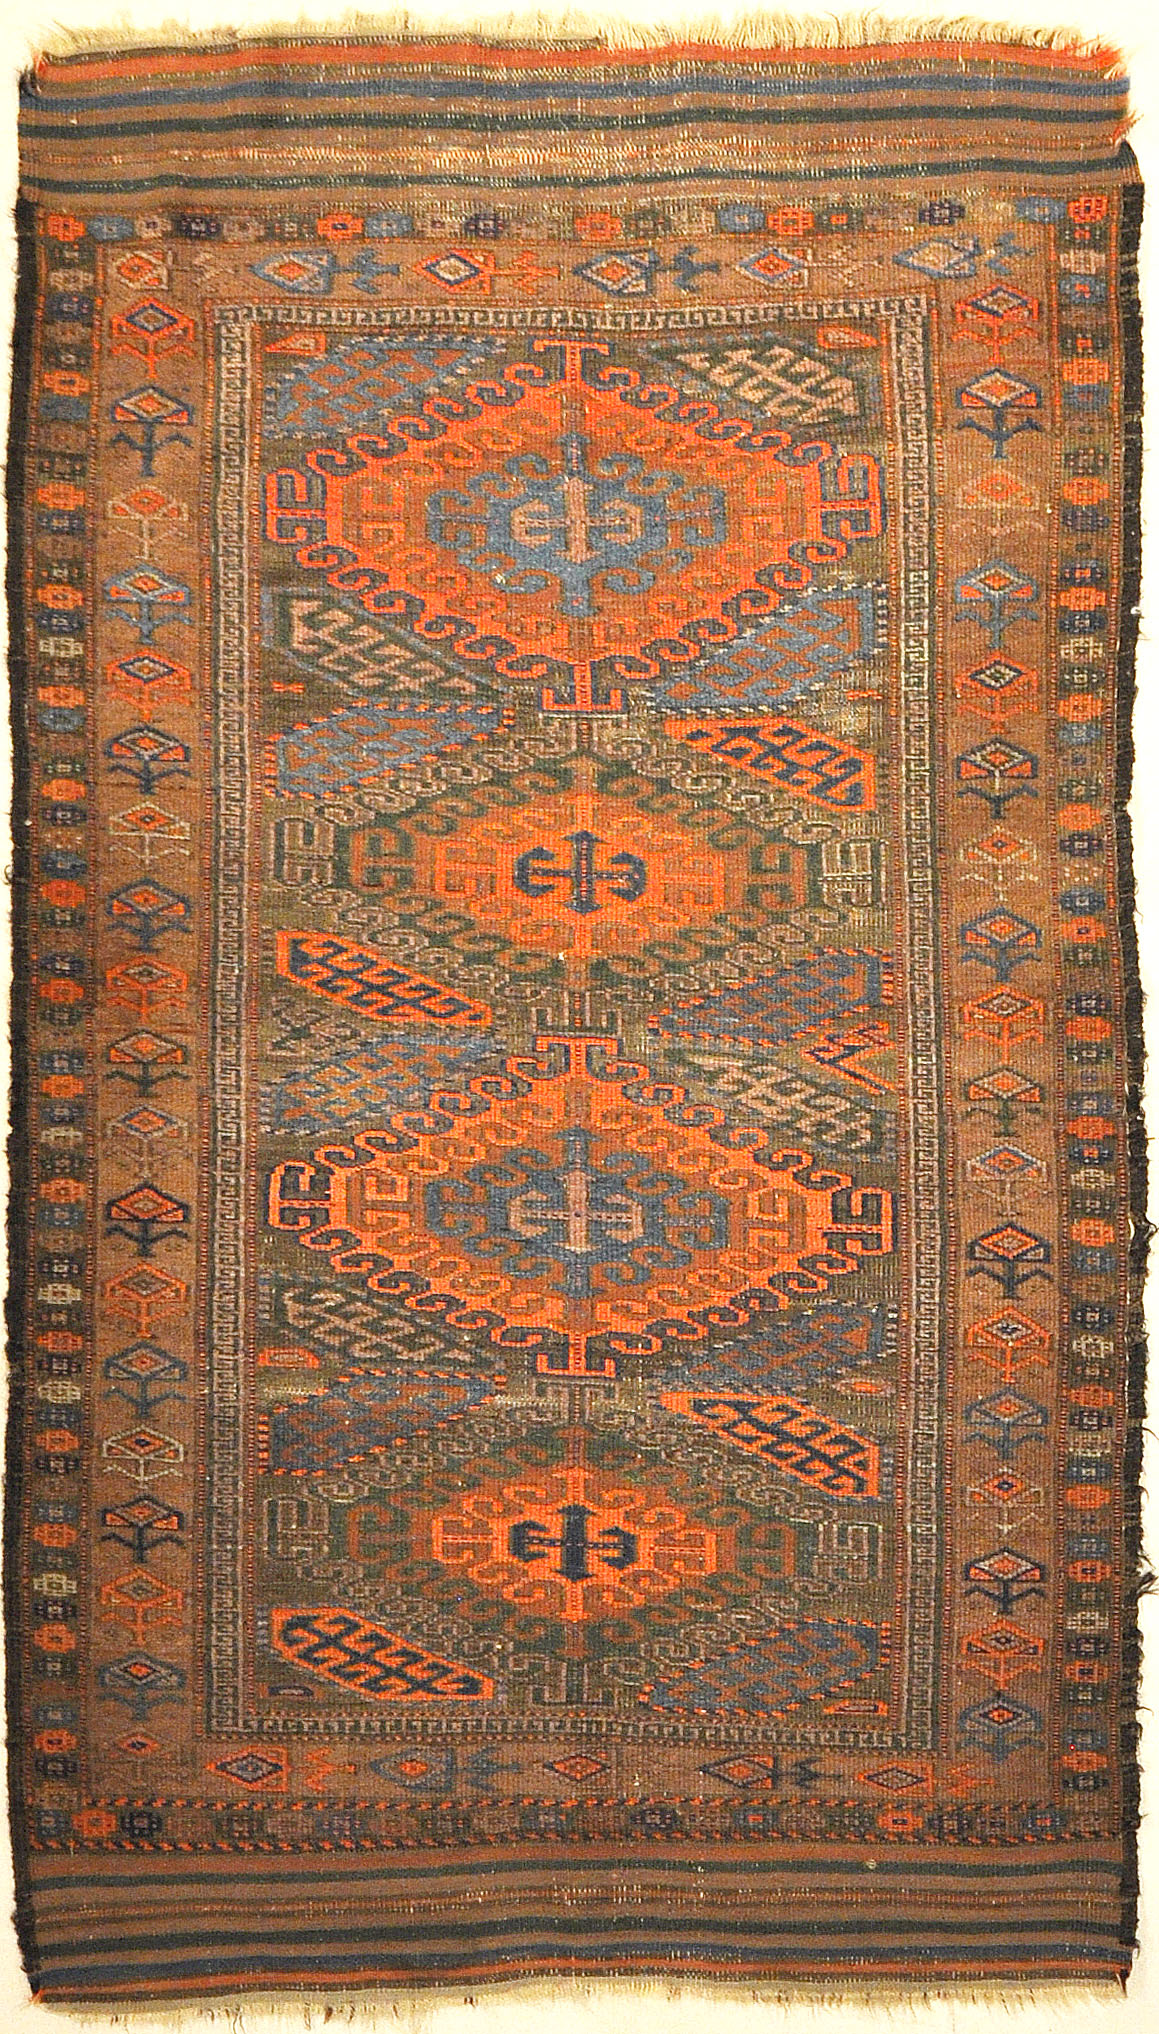 An antique original Mushwani Baluch rug handwoven in Afghanistan. A piece of genuine, authentic woven carpet art. Sold by Santa Barbara Design Center.